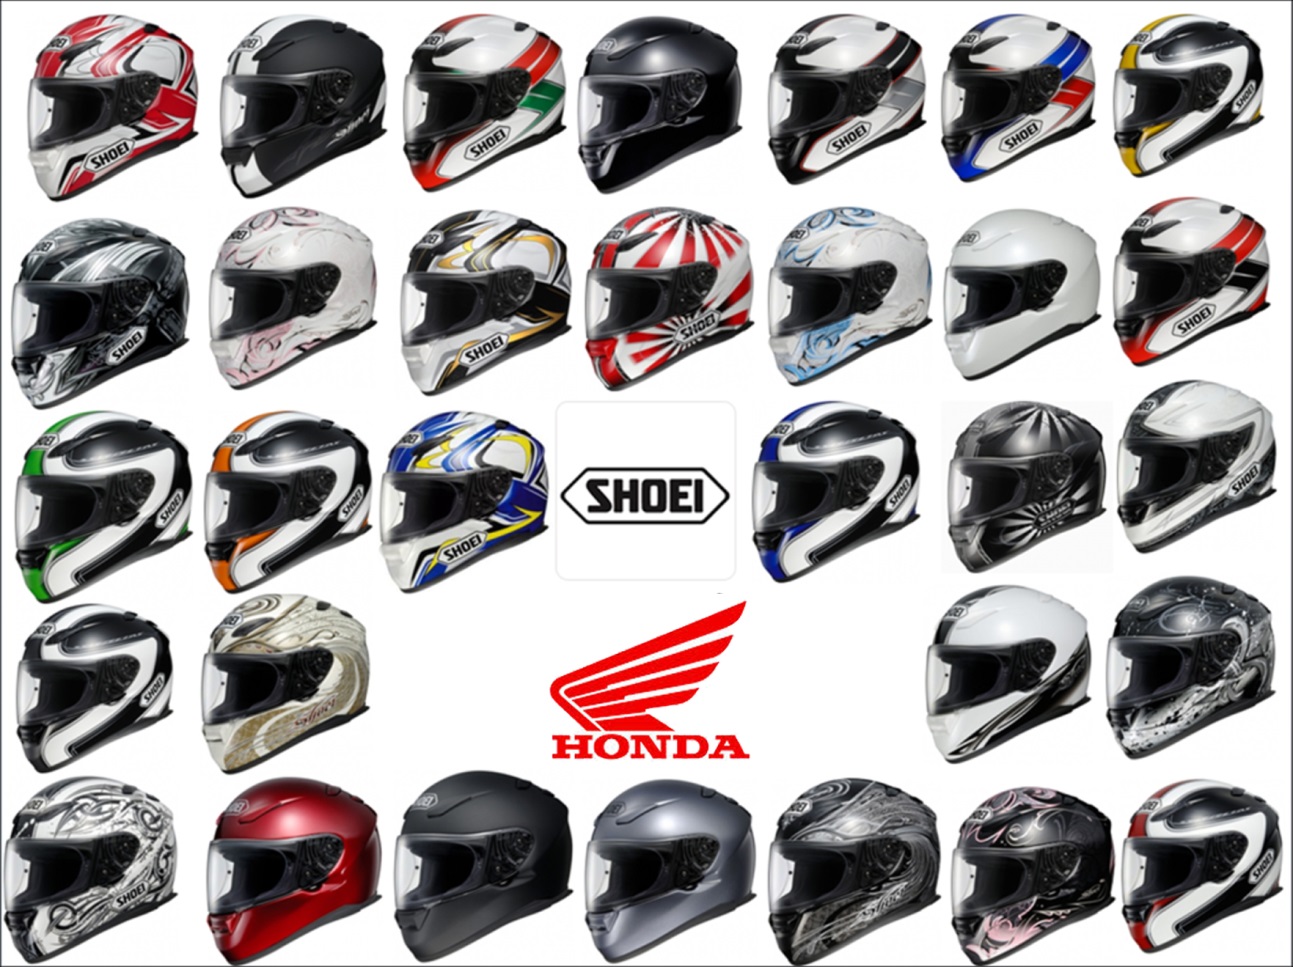 Honda of Bournemouth Blog: What To Expect From The Shoei XR1100 Helmet